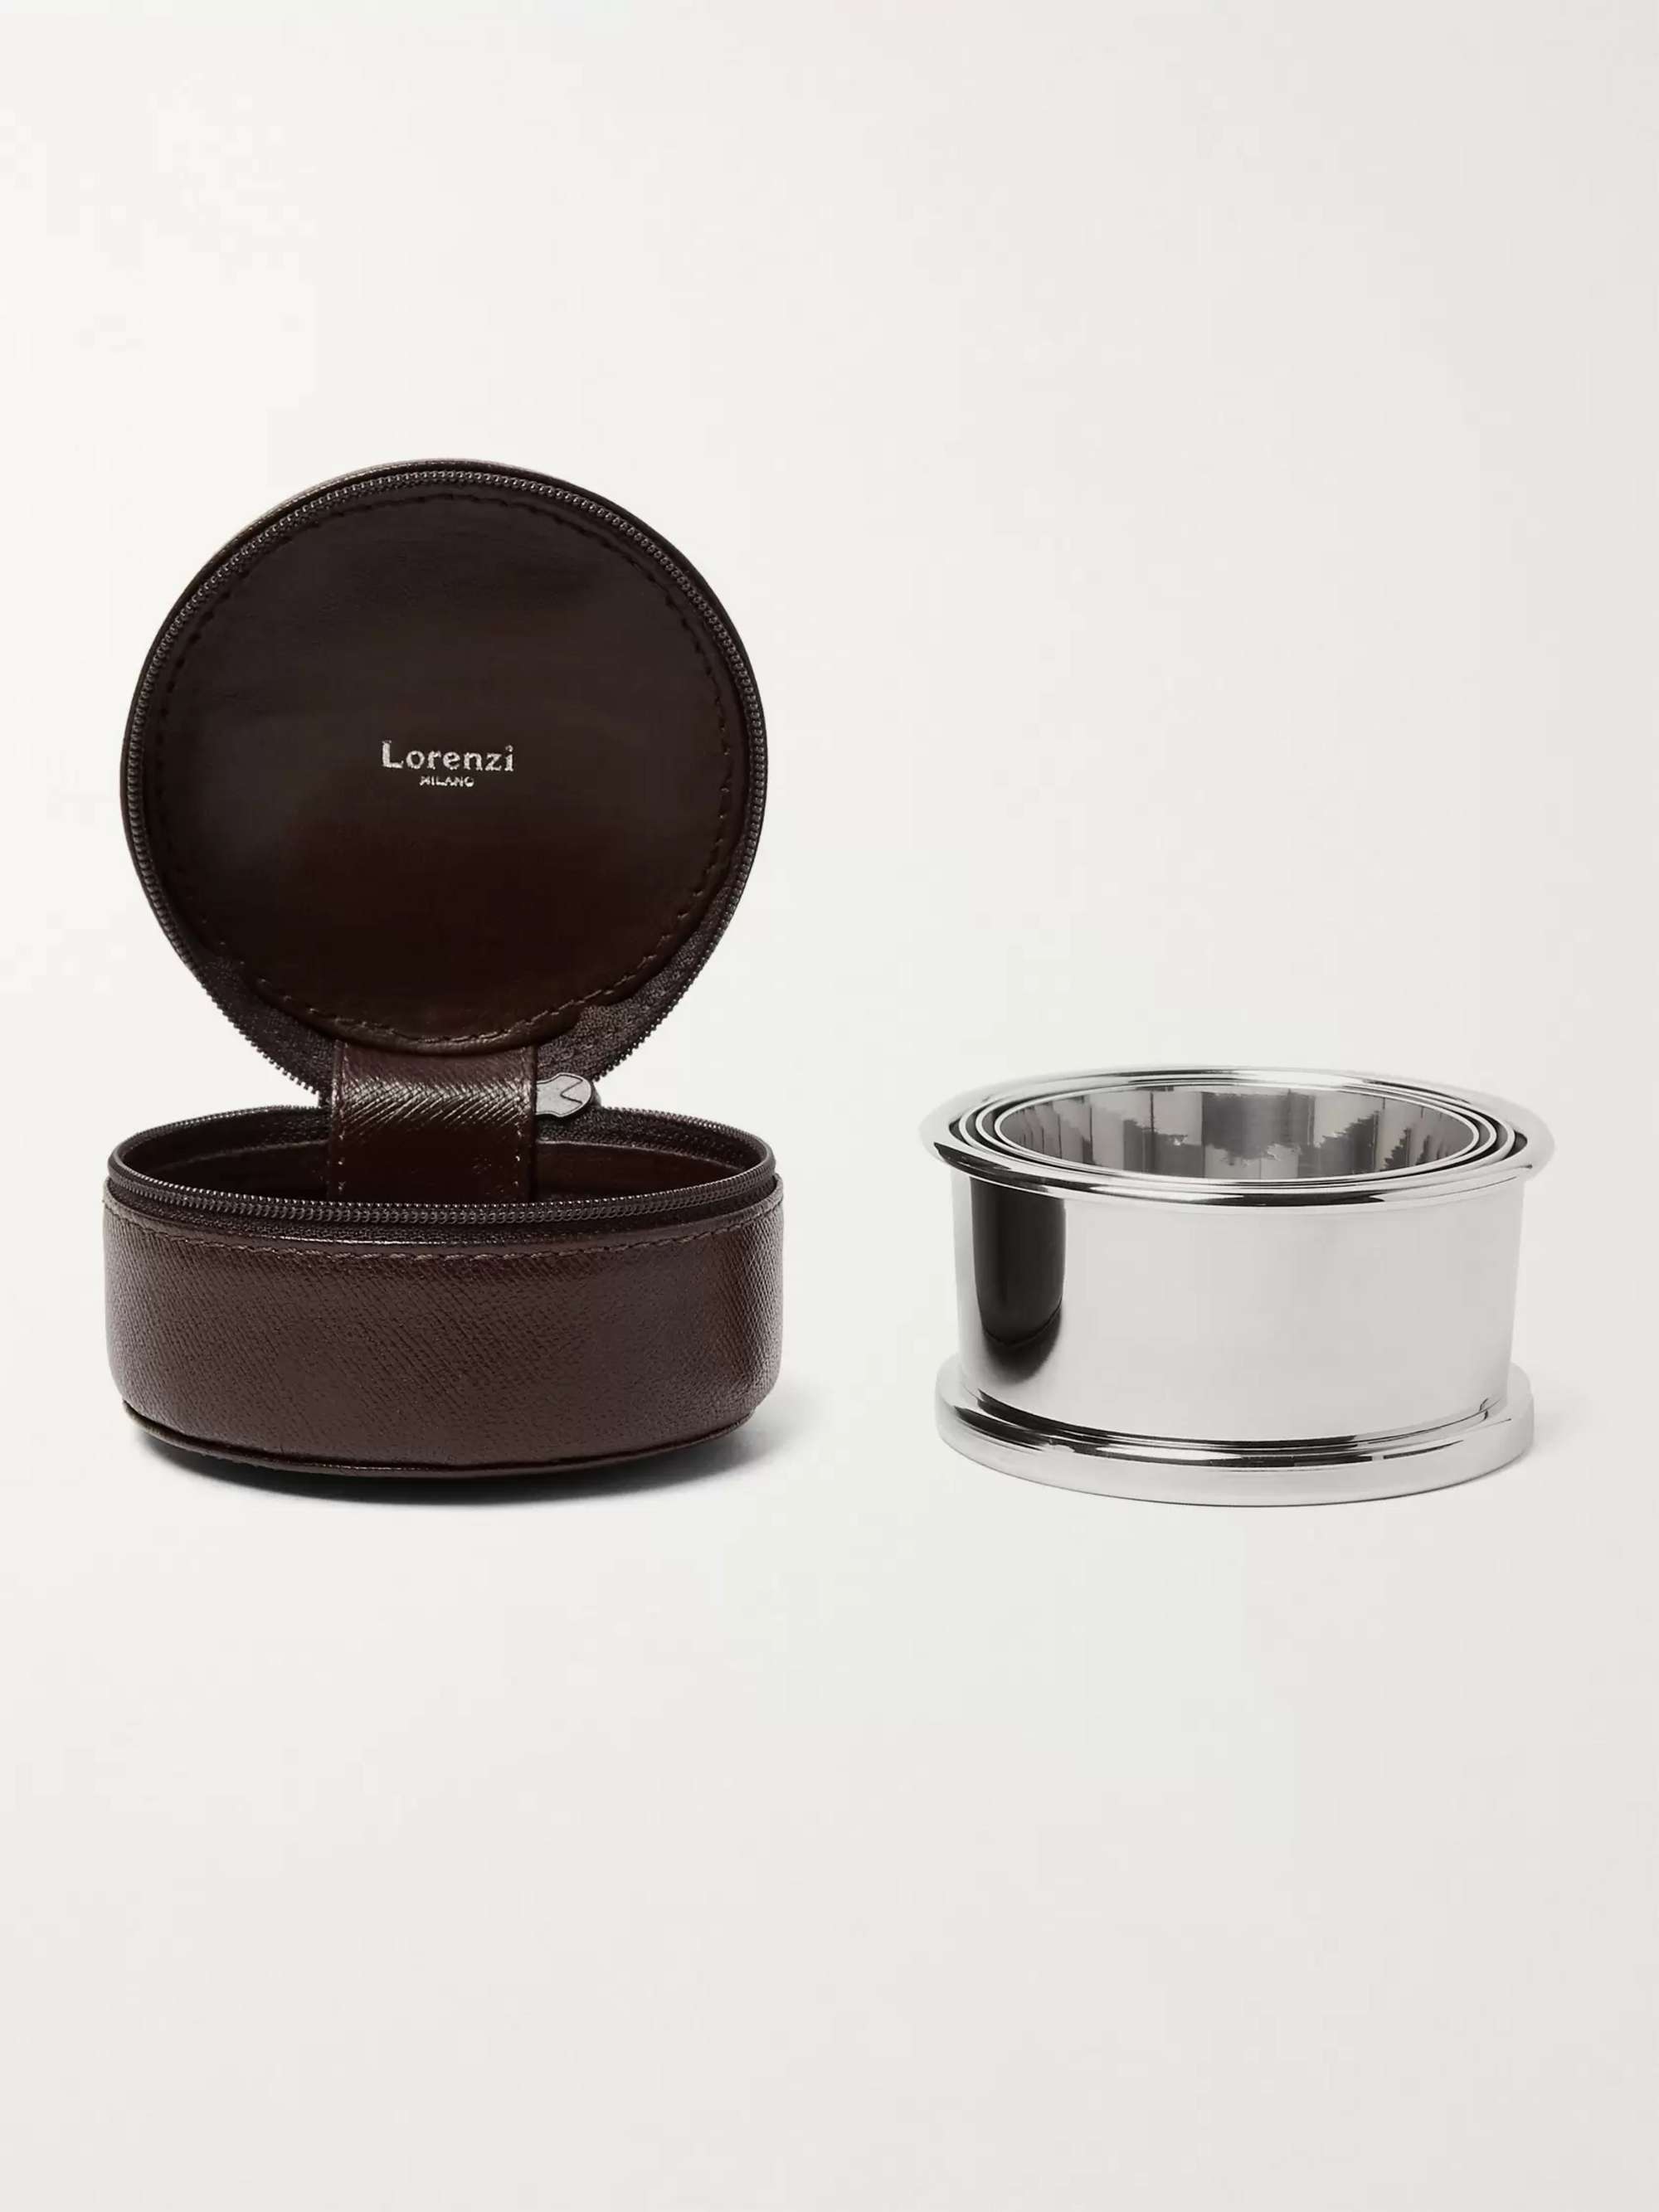 LORENZI MILANO Silver-Tone Collapsible Cup with Cross-Grain Leather Case